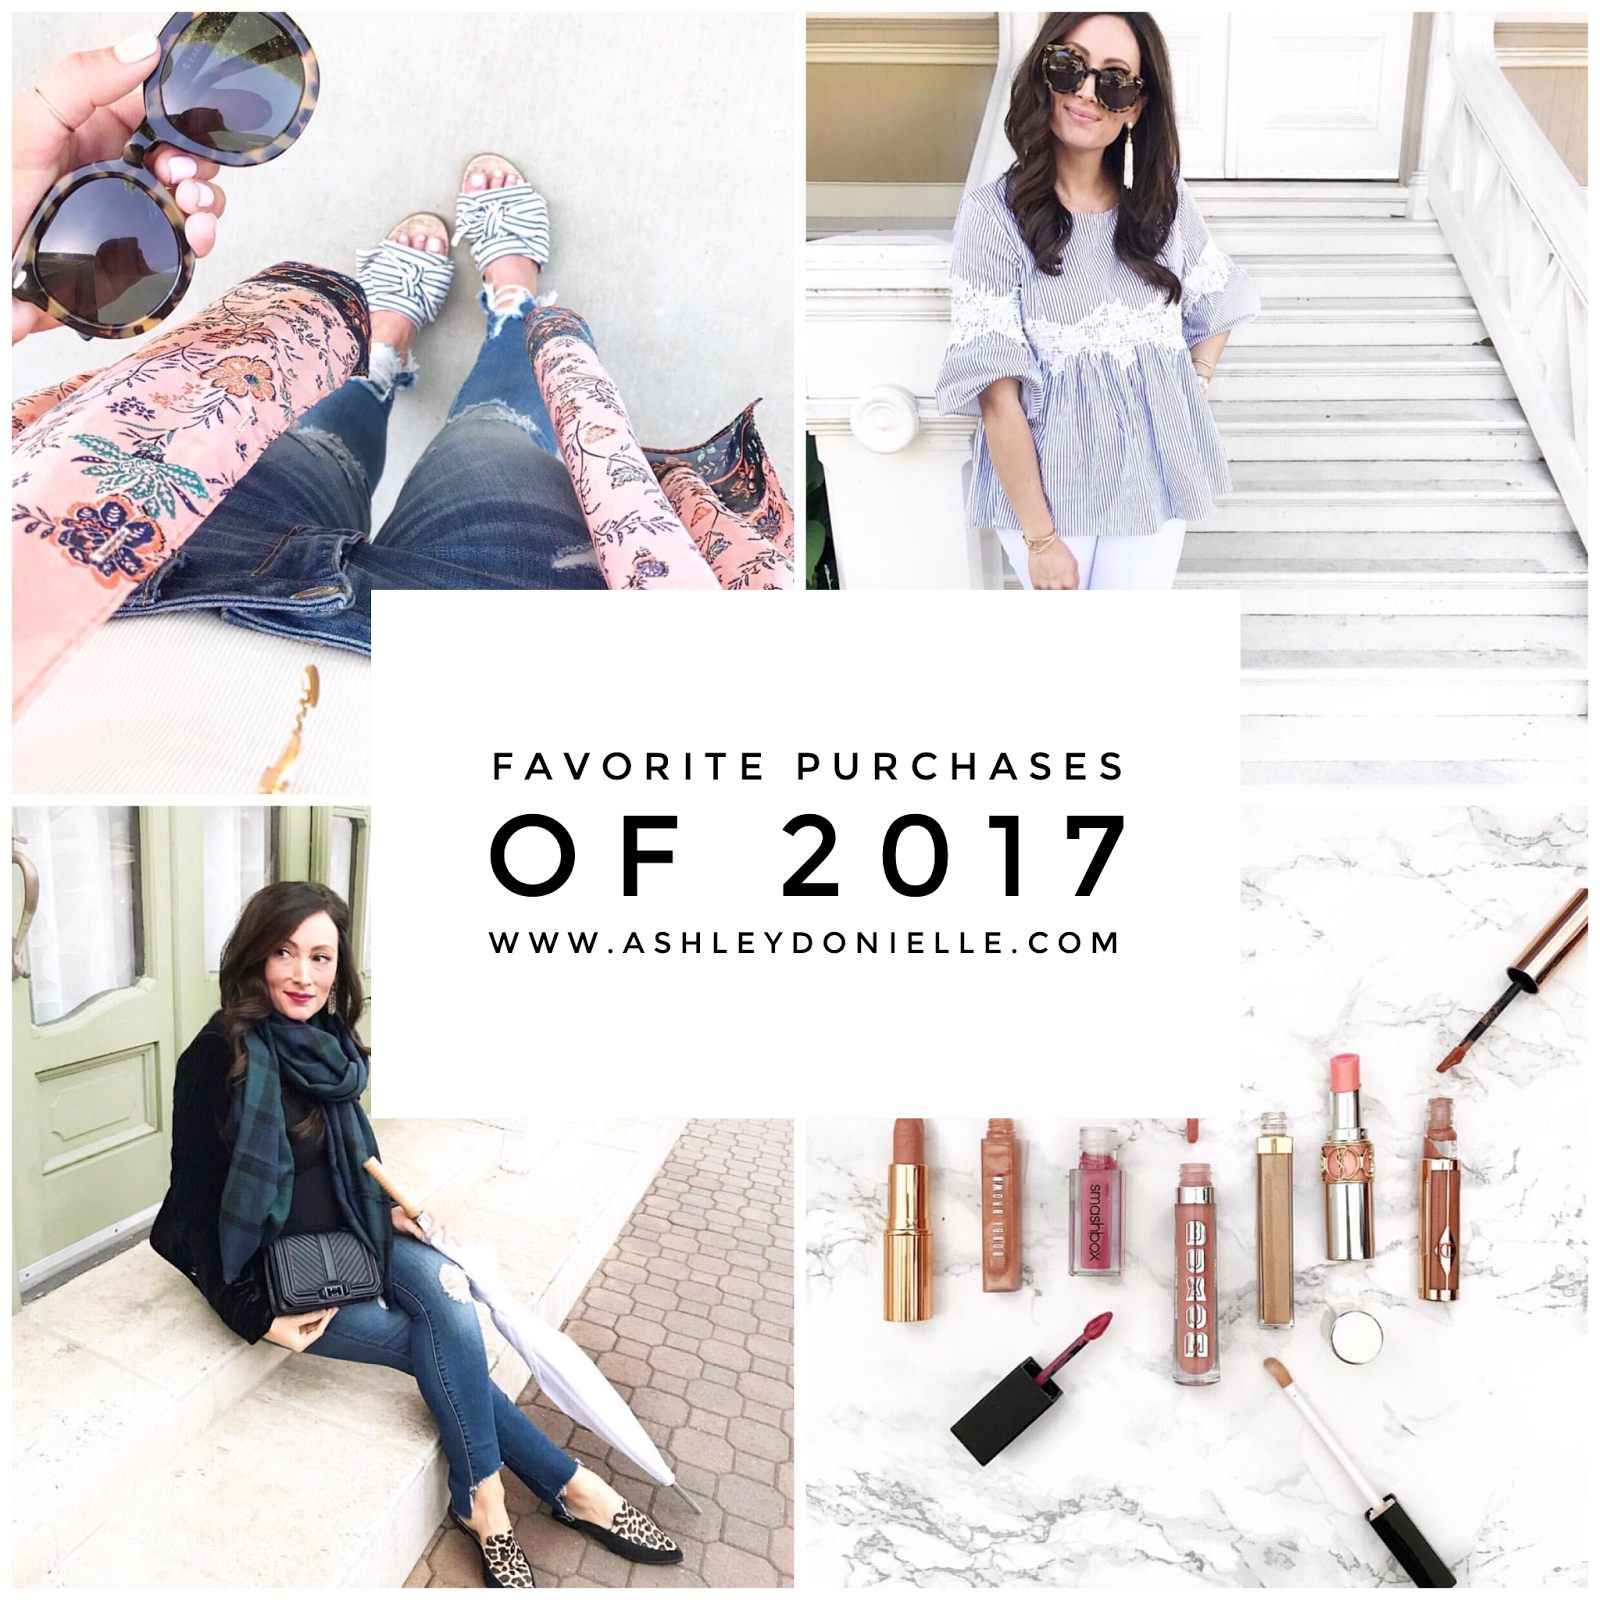 My Favorite Purchases of 2017 - Ashley Donielle